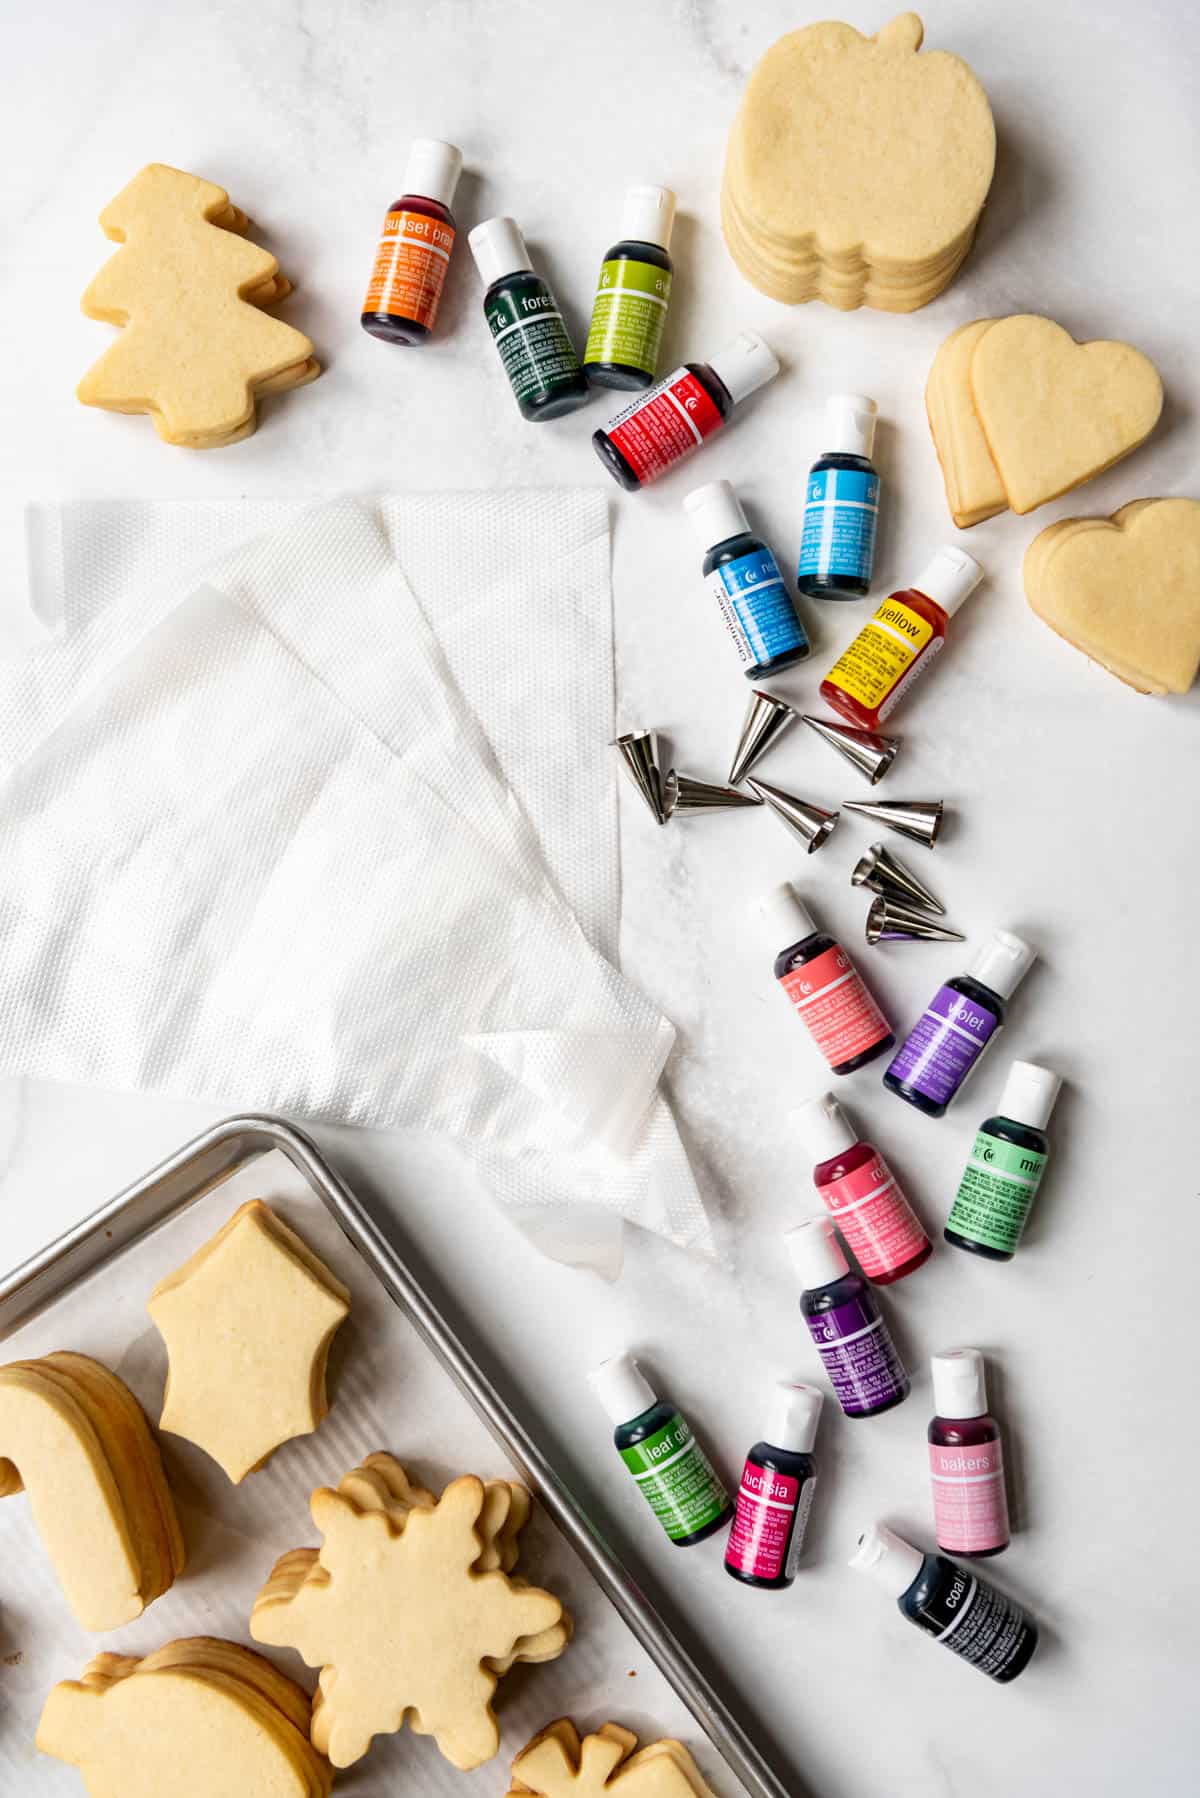 Unfrosted cut out sugar cookies next to bottles of gel food coloring, piping tips, and piping bags.